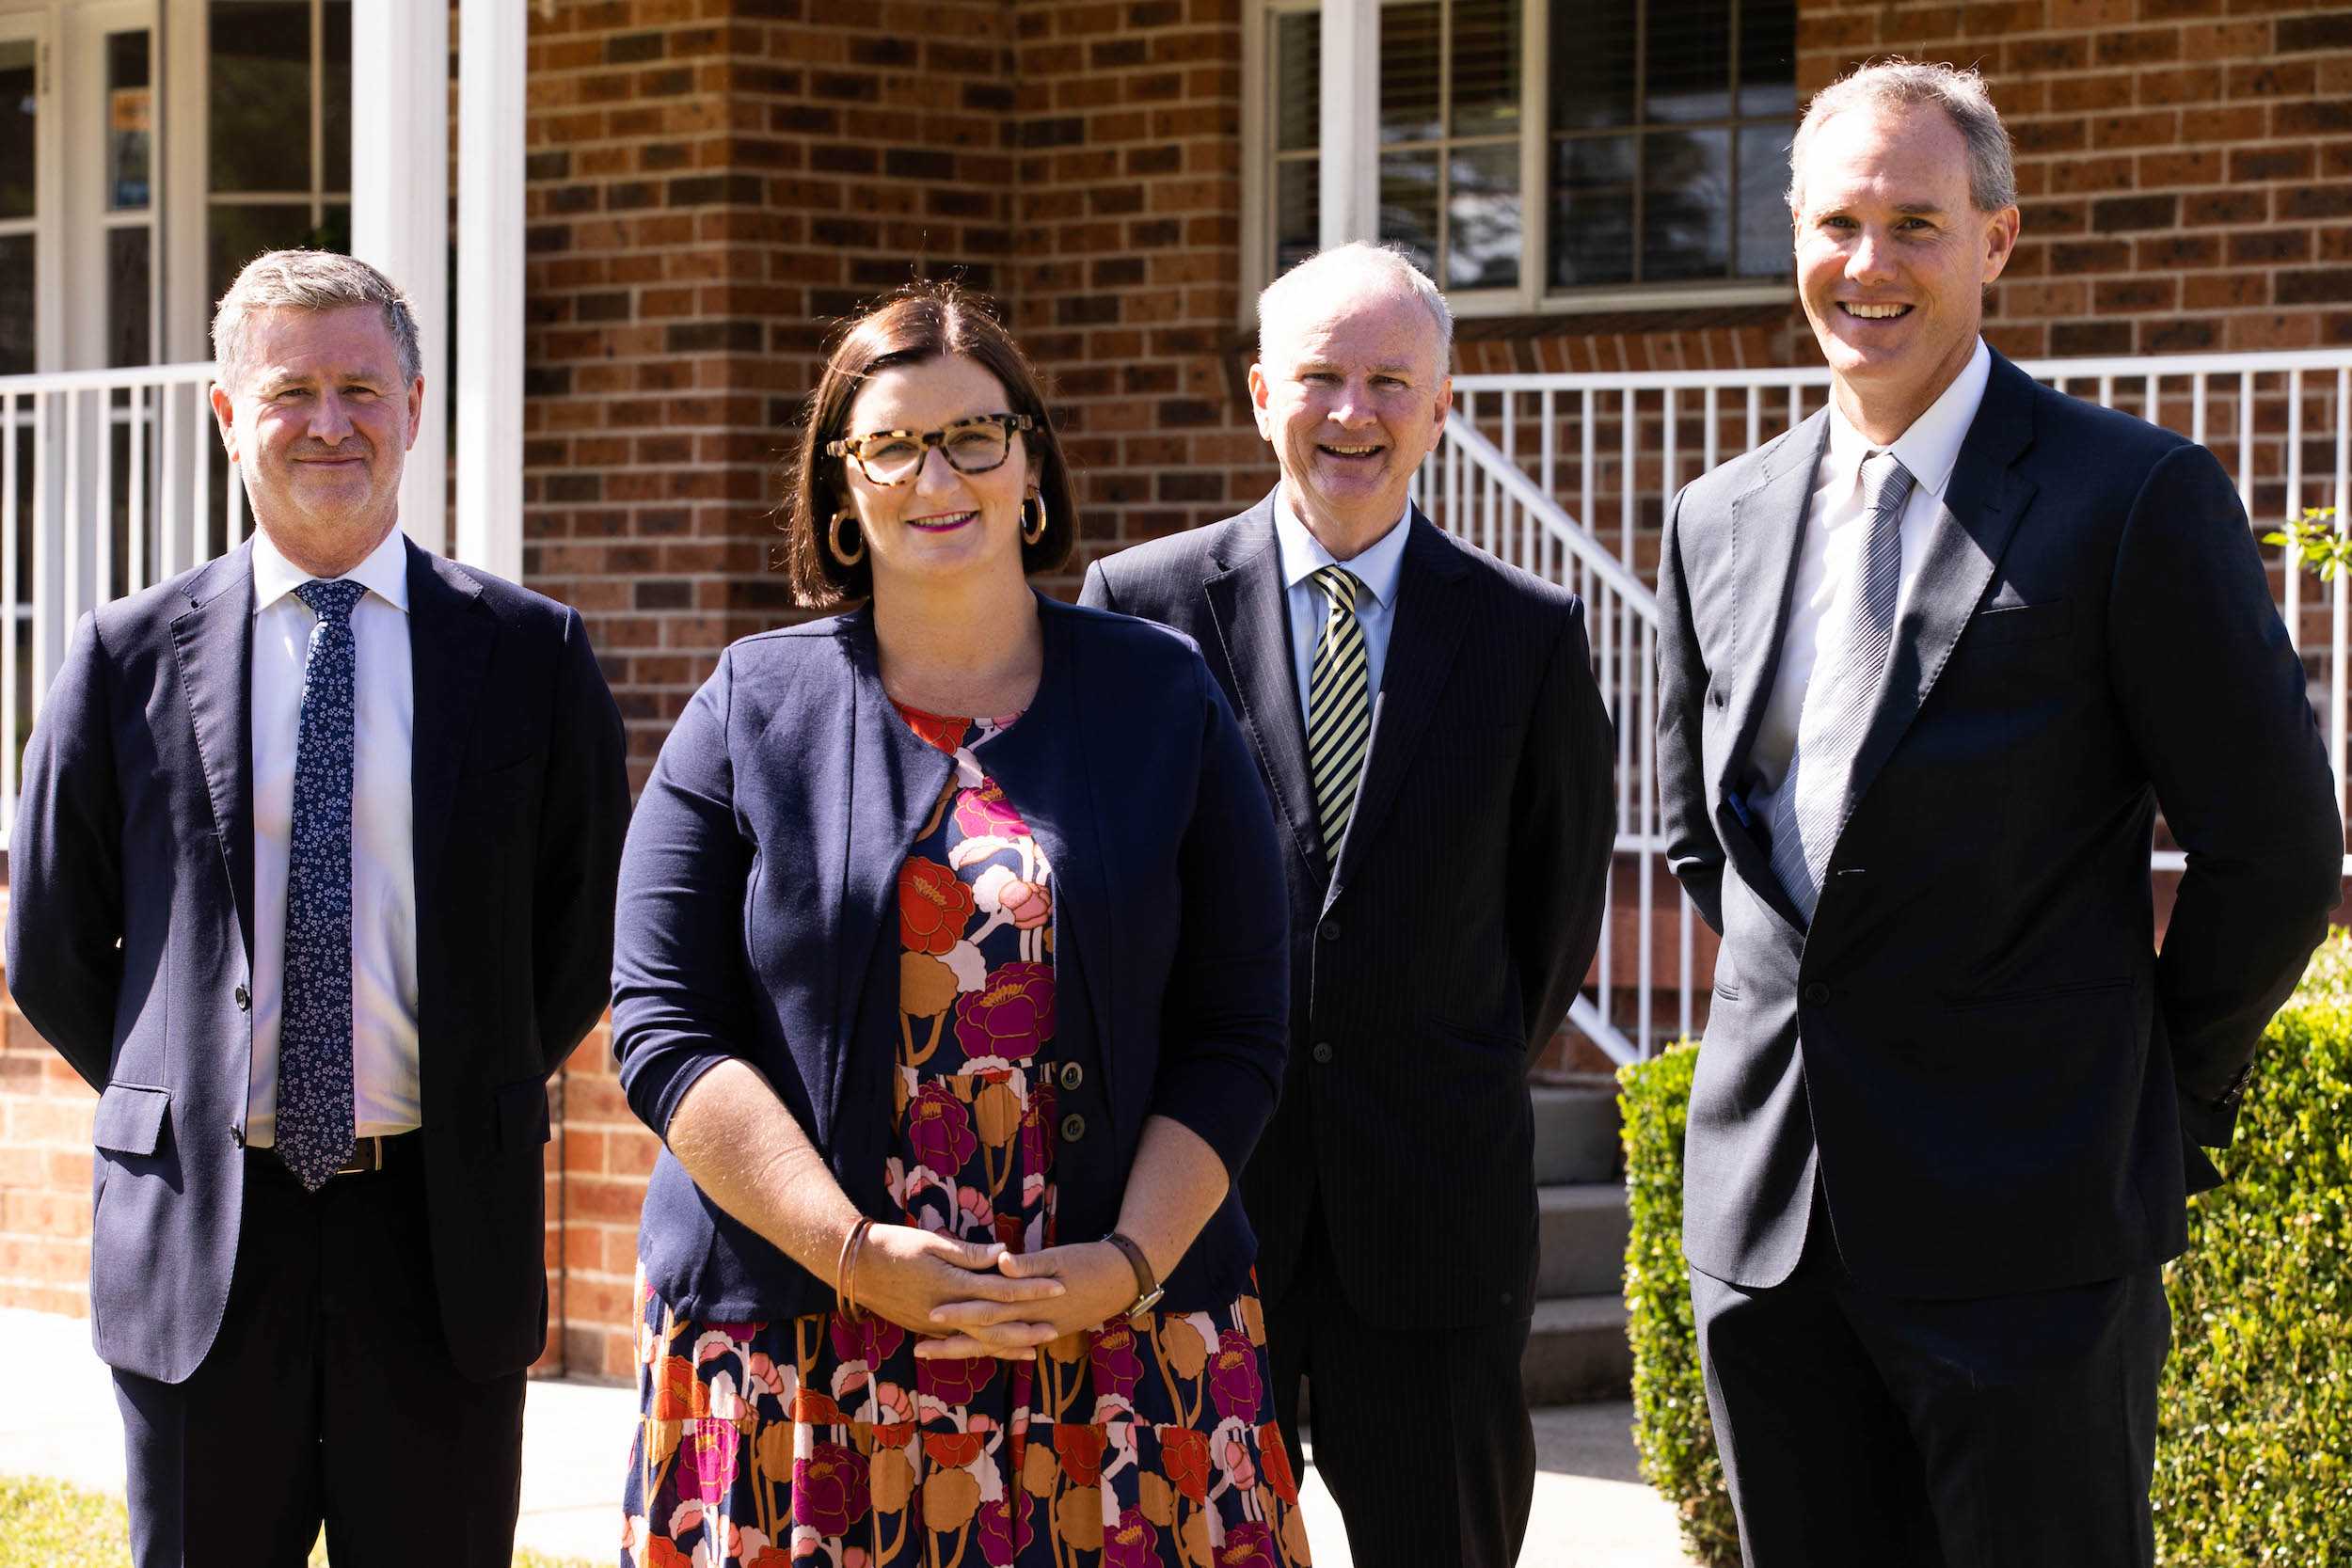 From left to right: School Principal Brendan Corr, NSW Education Minister Sarah Mitchell, Local MP Kevin Conolly and Group CEO David Fyfe.